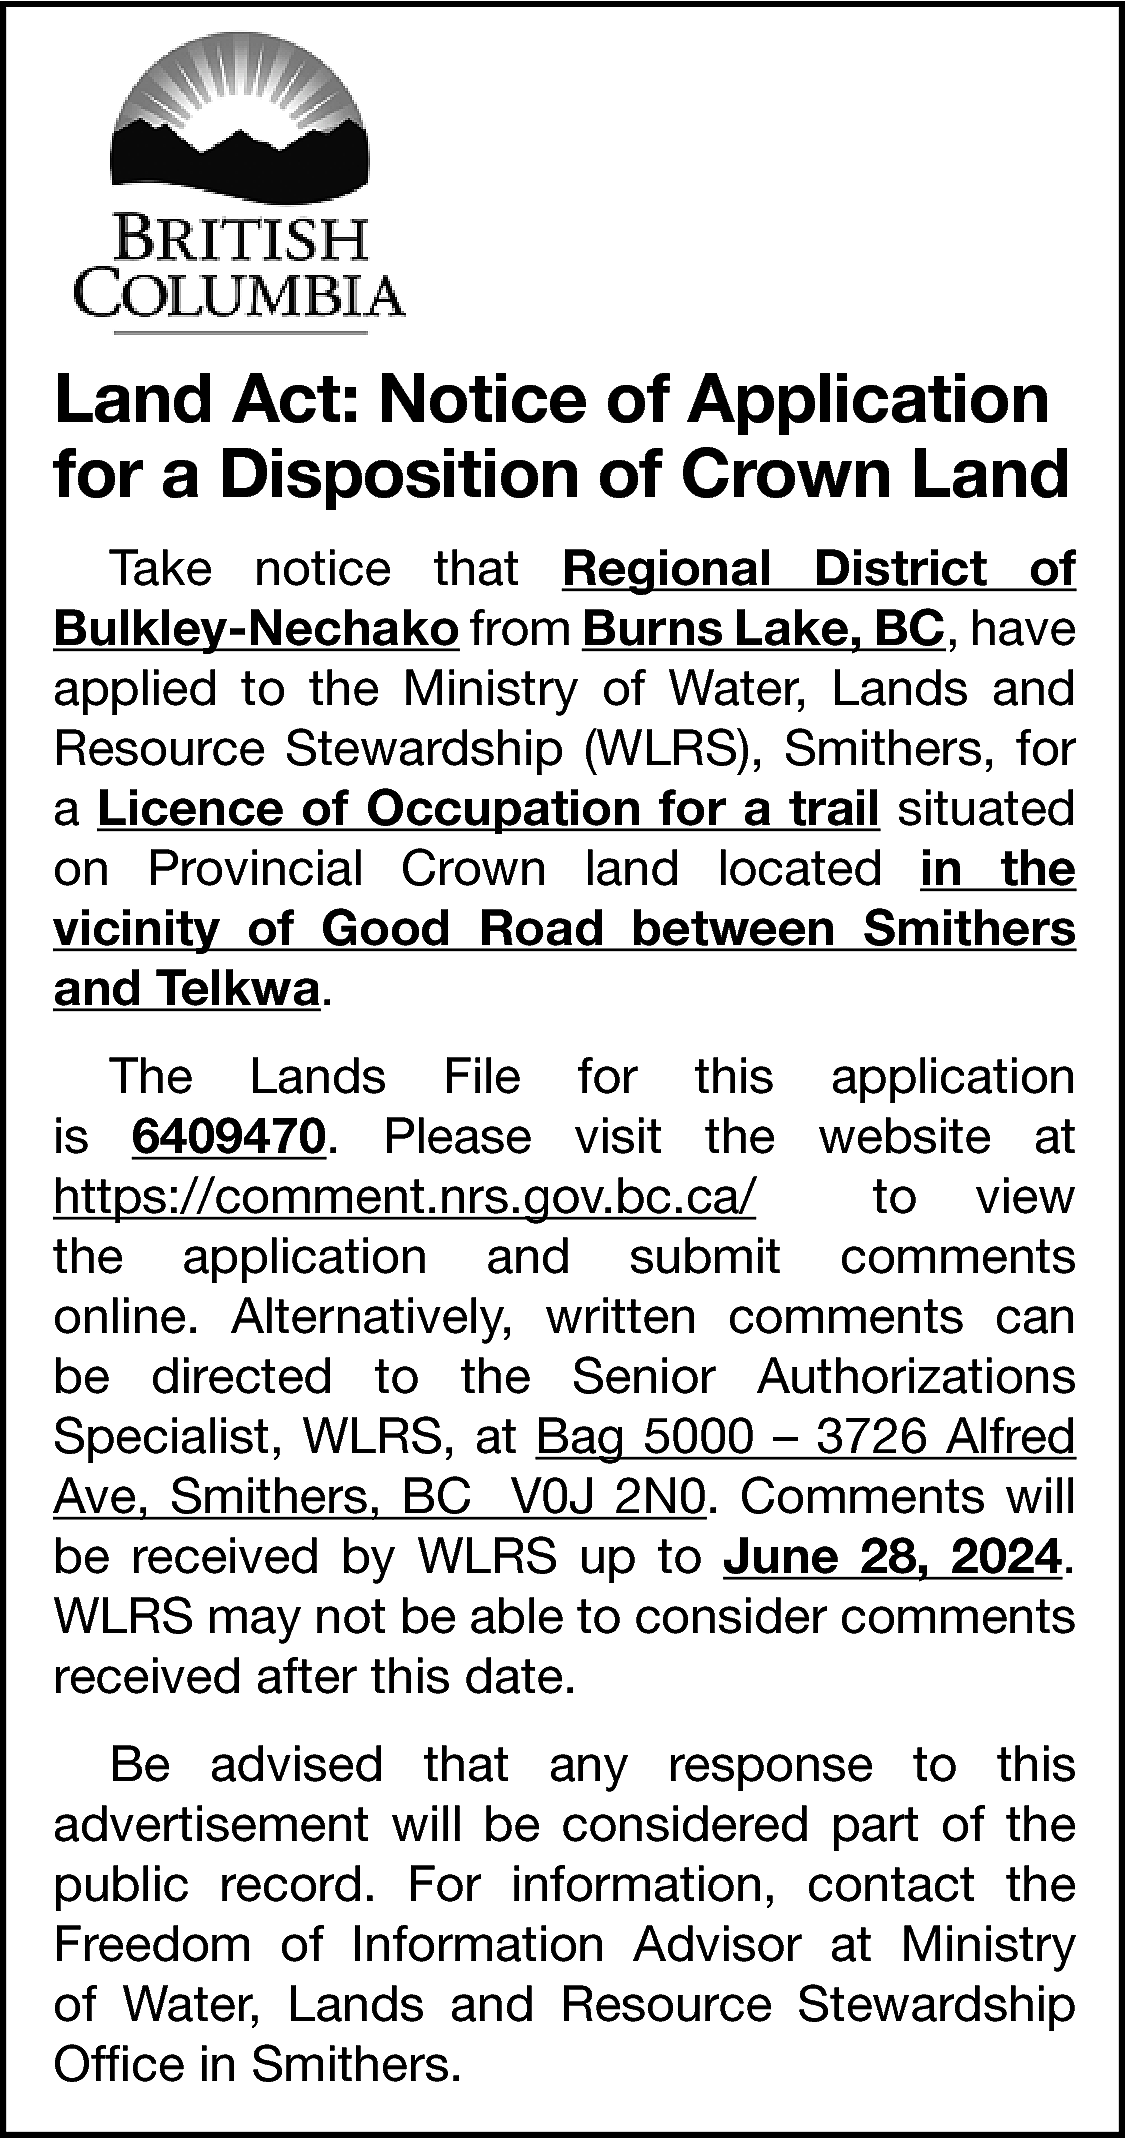 Land Act: Notice of Application  Land Act: Notice of Application  for a Disposition of Crown Land  Take notice that Regional District of  Bulkley-Nechako from Burns Lake, BC, have  applied to the Ministry of Water, Lands and  Resource Stewardship (WLRS), Smithers, for  a Licence of Occupation for a trail situated  on Provincial Crown land located in the  vicinity of Good Road between Smithers  and Telkwa.  The Lands File for this application  is 6409470. Please visit the website at  https://comment.nrs.gov.bc.ca/  to view  the application and submit comments  online. Alternatively, written comments can  be directed to the Senior Authorizations  Specialist, WLRS, at Bag 5000 – 3726 Alfred  Ave, Smithers, BC V0J 2N0. Comments will  be received by WLRS up to June 28, 2024.  WLRS may not be able to consider comments  received after this date.  Be advised that any response to this  advertisement will be considered part of the  public record. For information, contact the  Freedom of Information Advisor at Ministry  of Water, Lands and Resource Stewardship  Office in Smithers.    